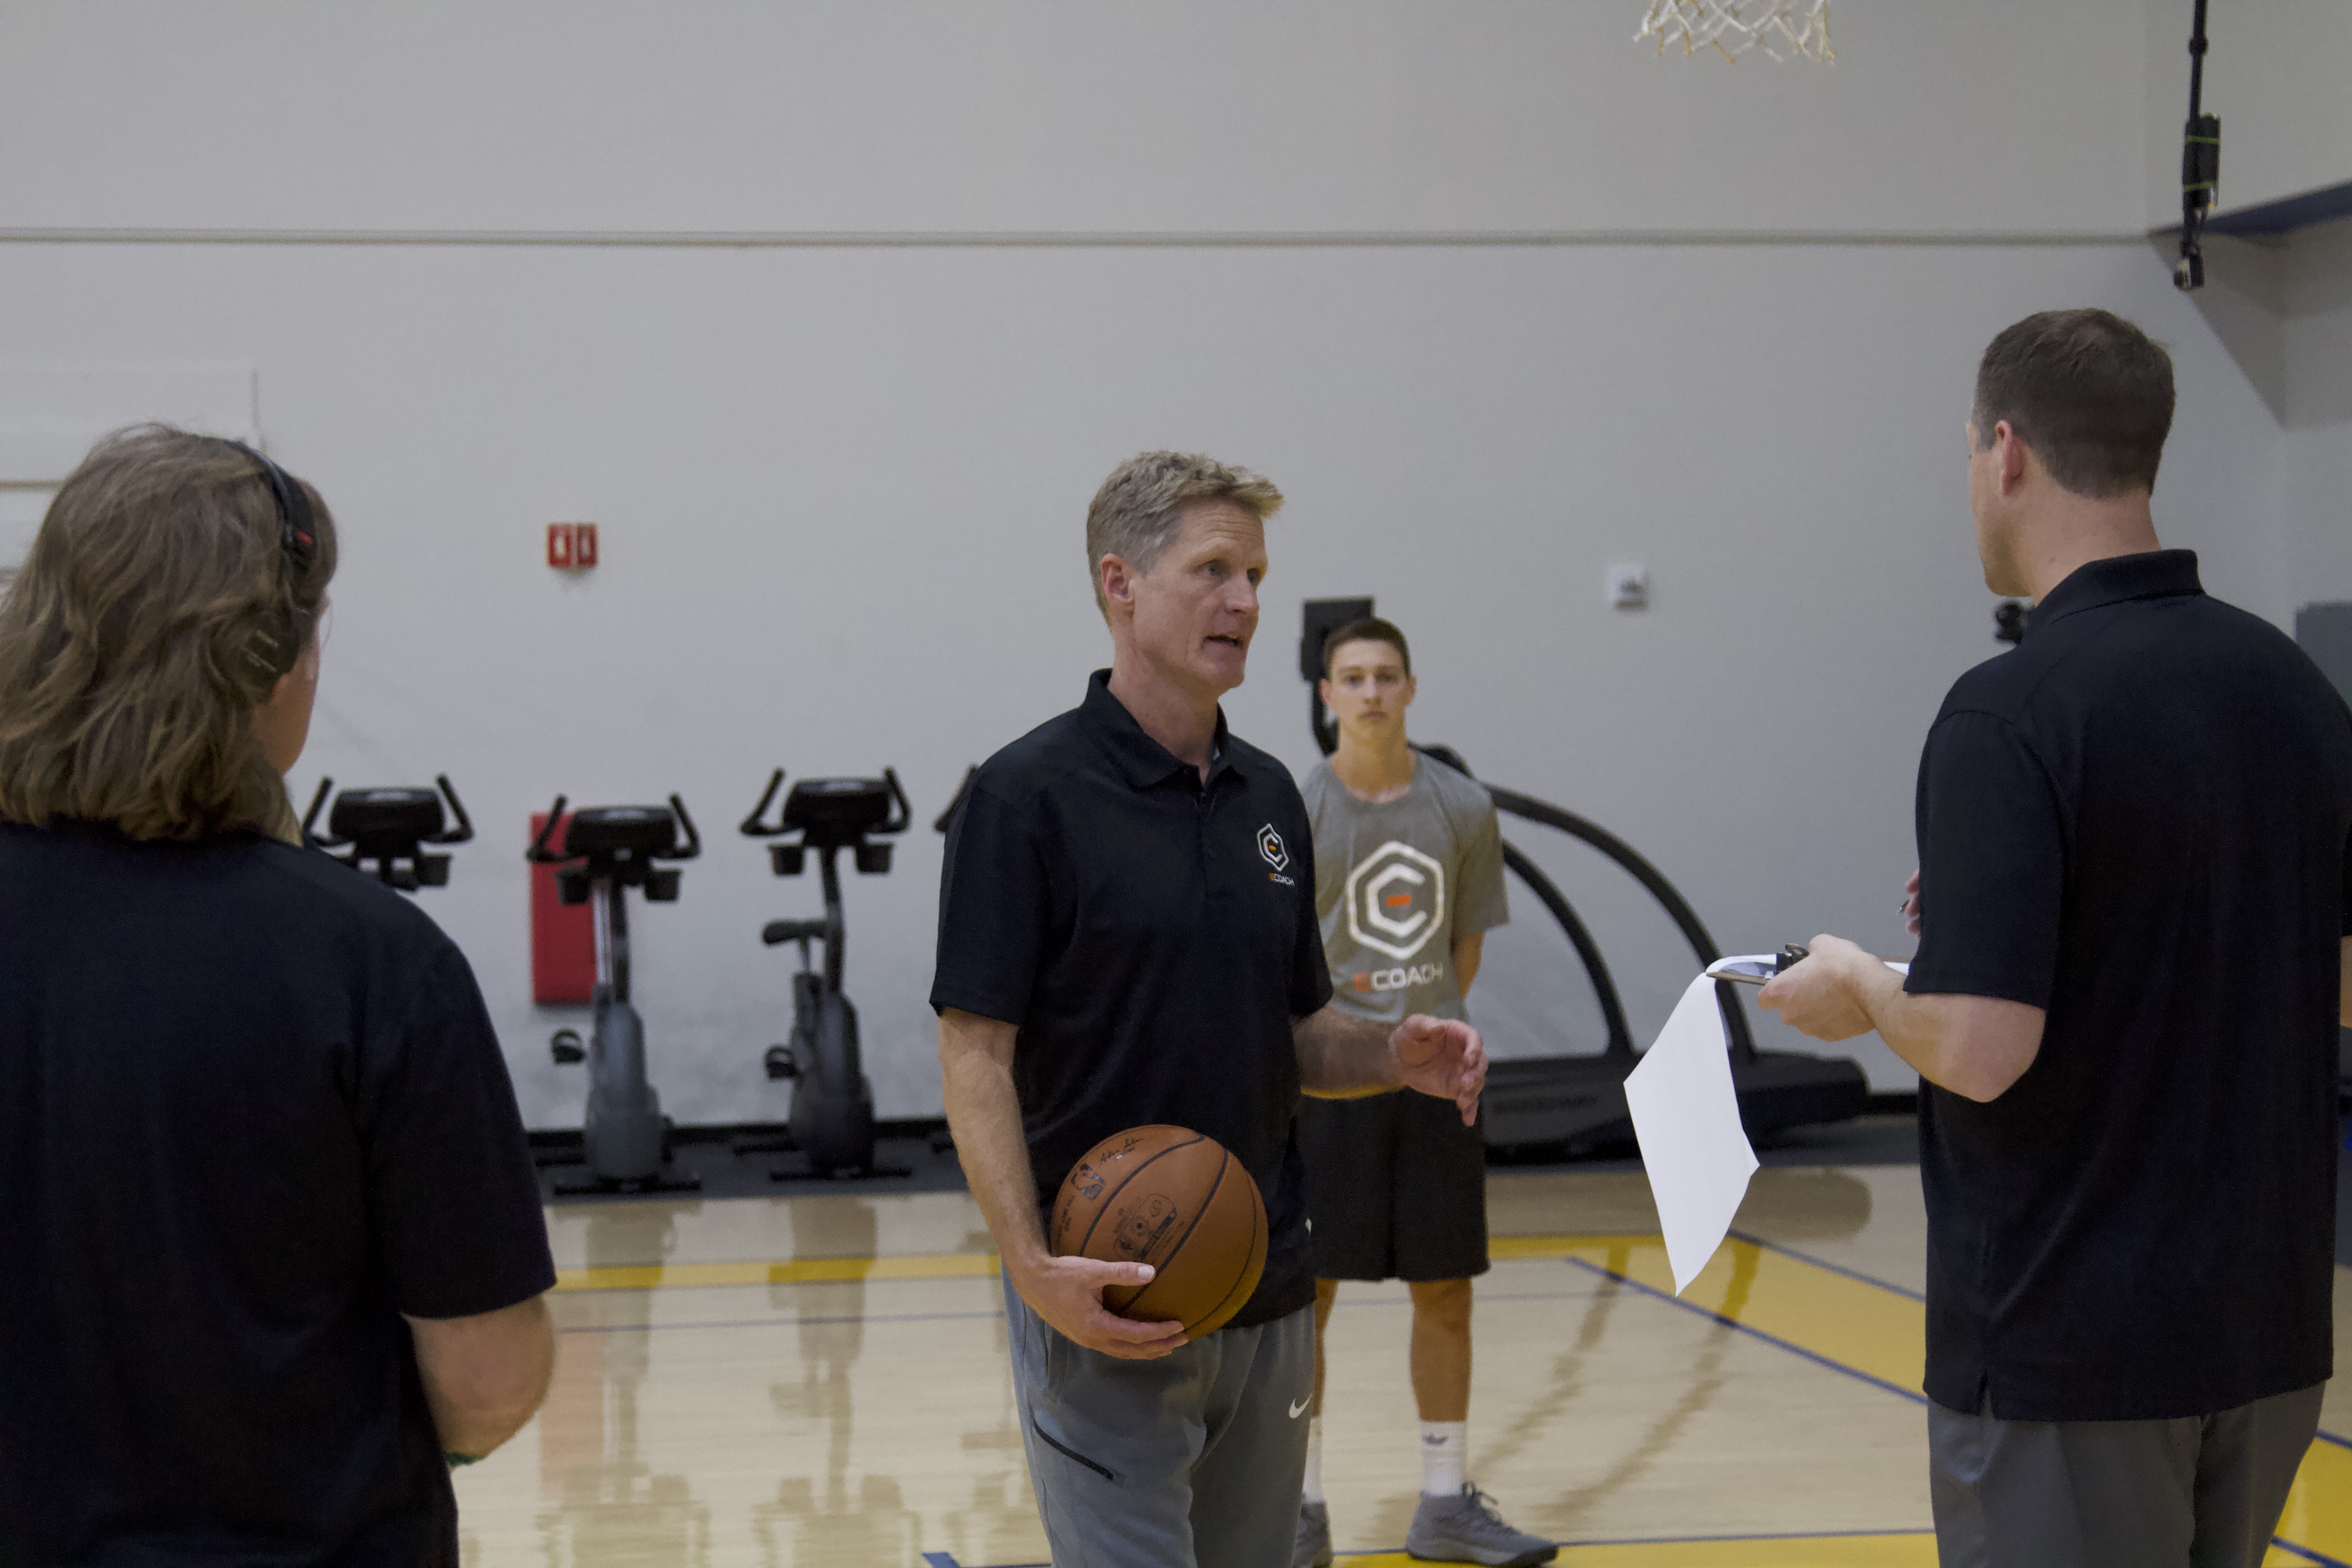 Basketball Courses and Coaching Certifications taught exclusively by NBA Coaches